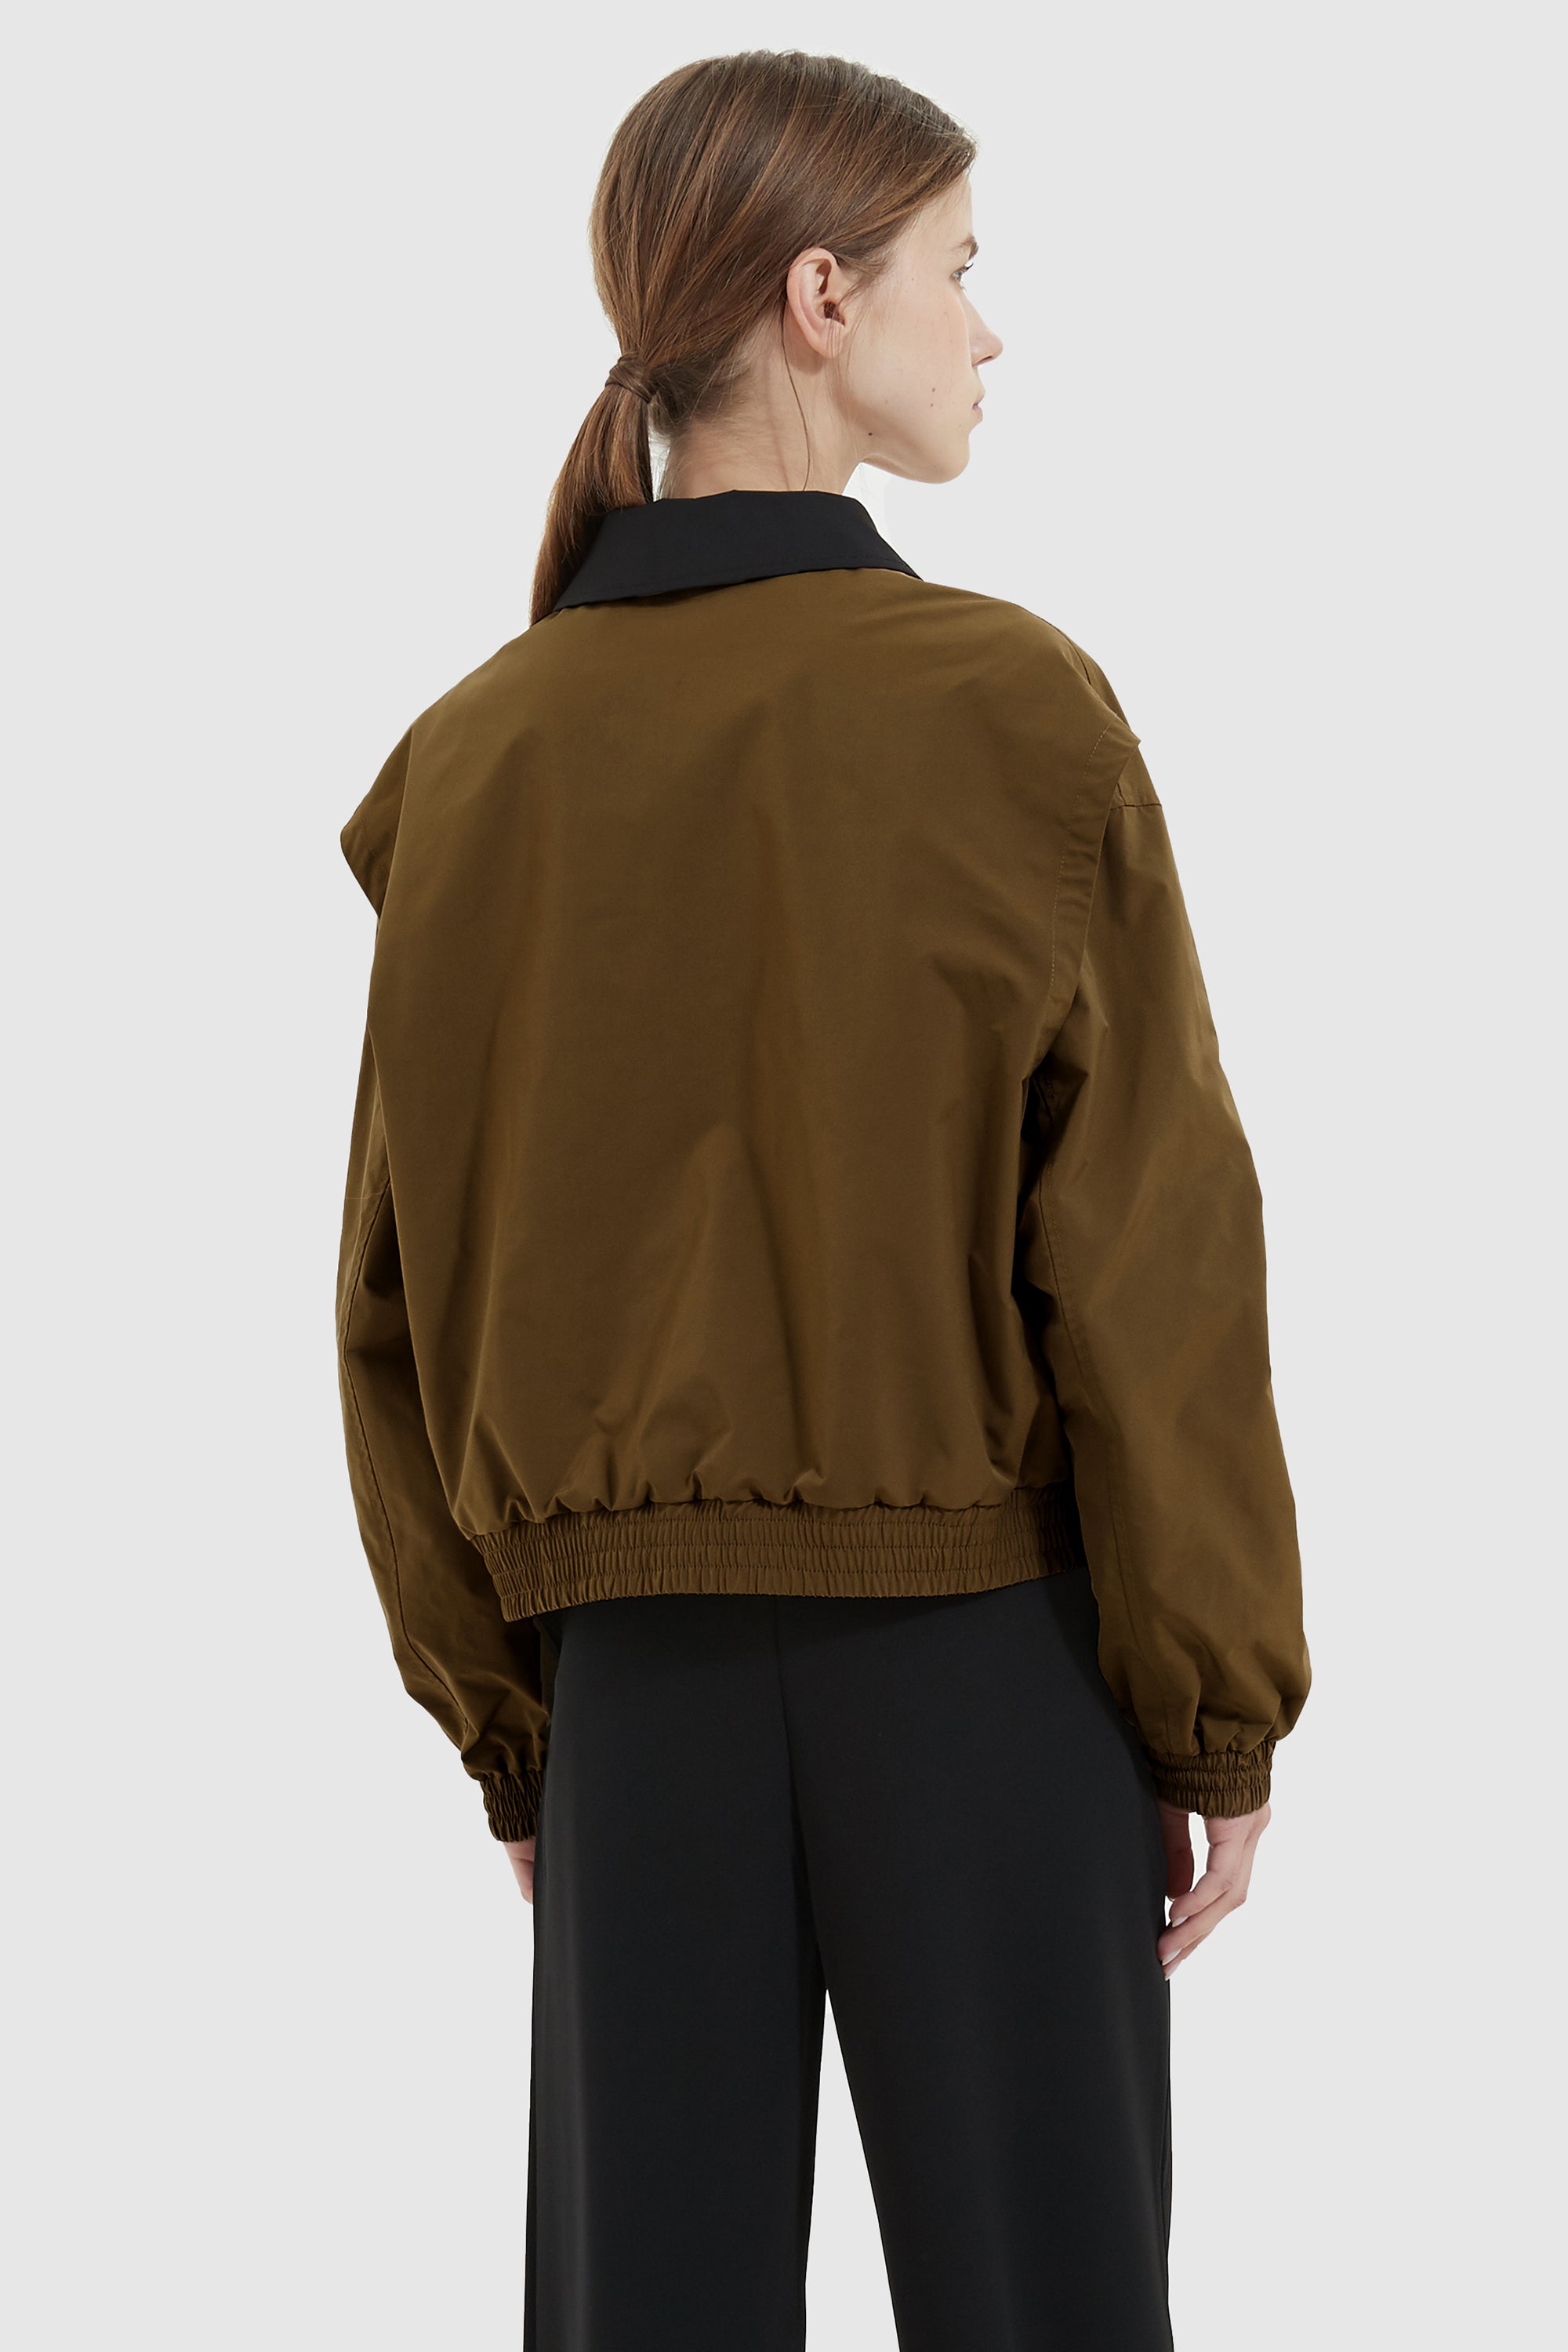 Orolay® Official Site - Down Jackets Sale-Up to 60% Off